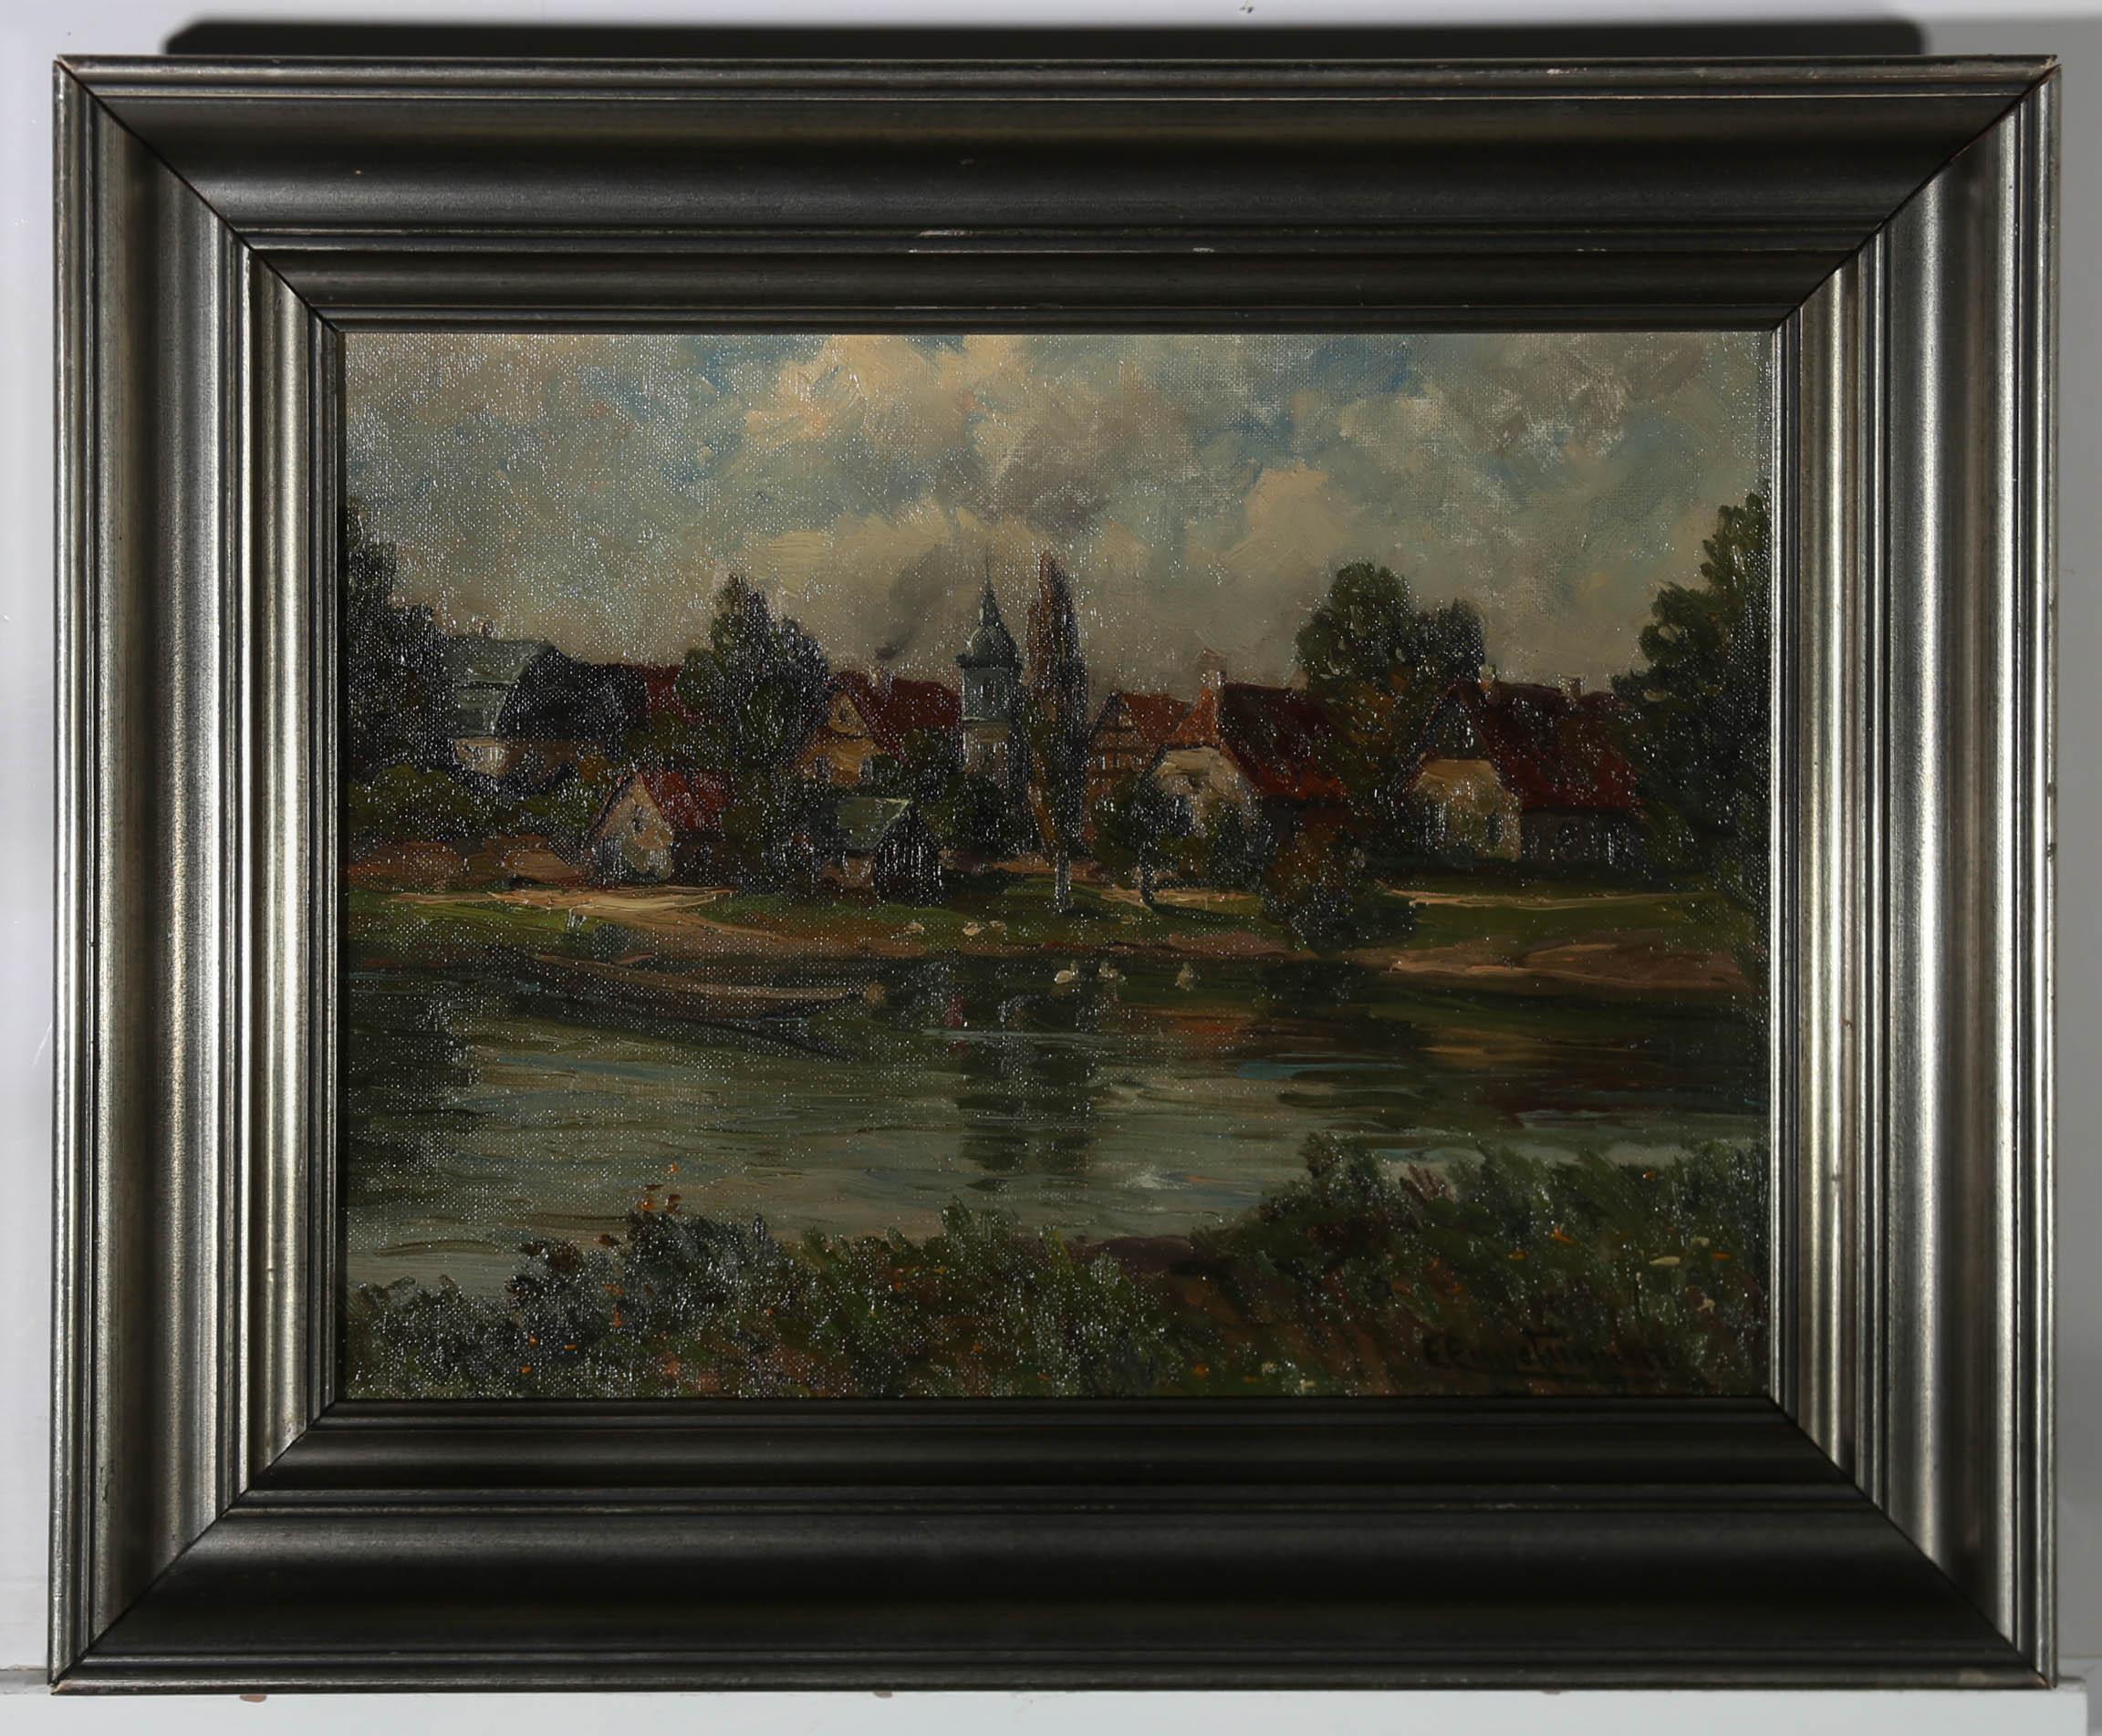 Captured in sophisticated short strokes, is this stunning in situ scene of a Danish village. In the foreground the artist has portrayed white swans gliding on a quiet riverfront, with traditional country house dotted amongst verdant trees behind.